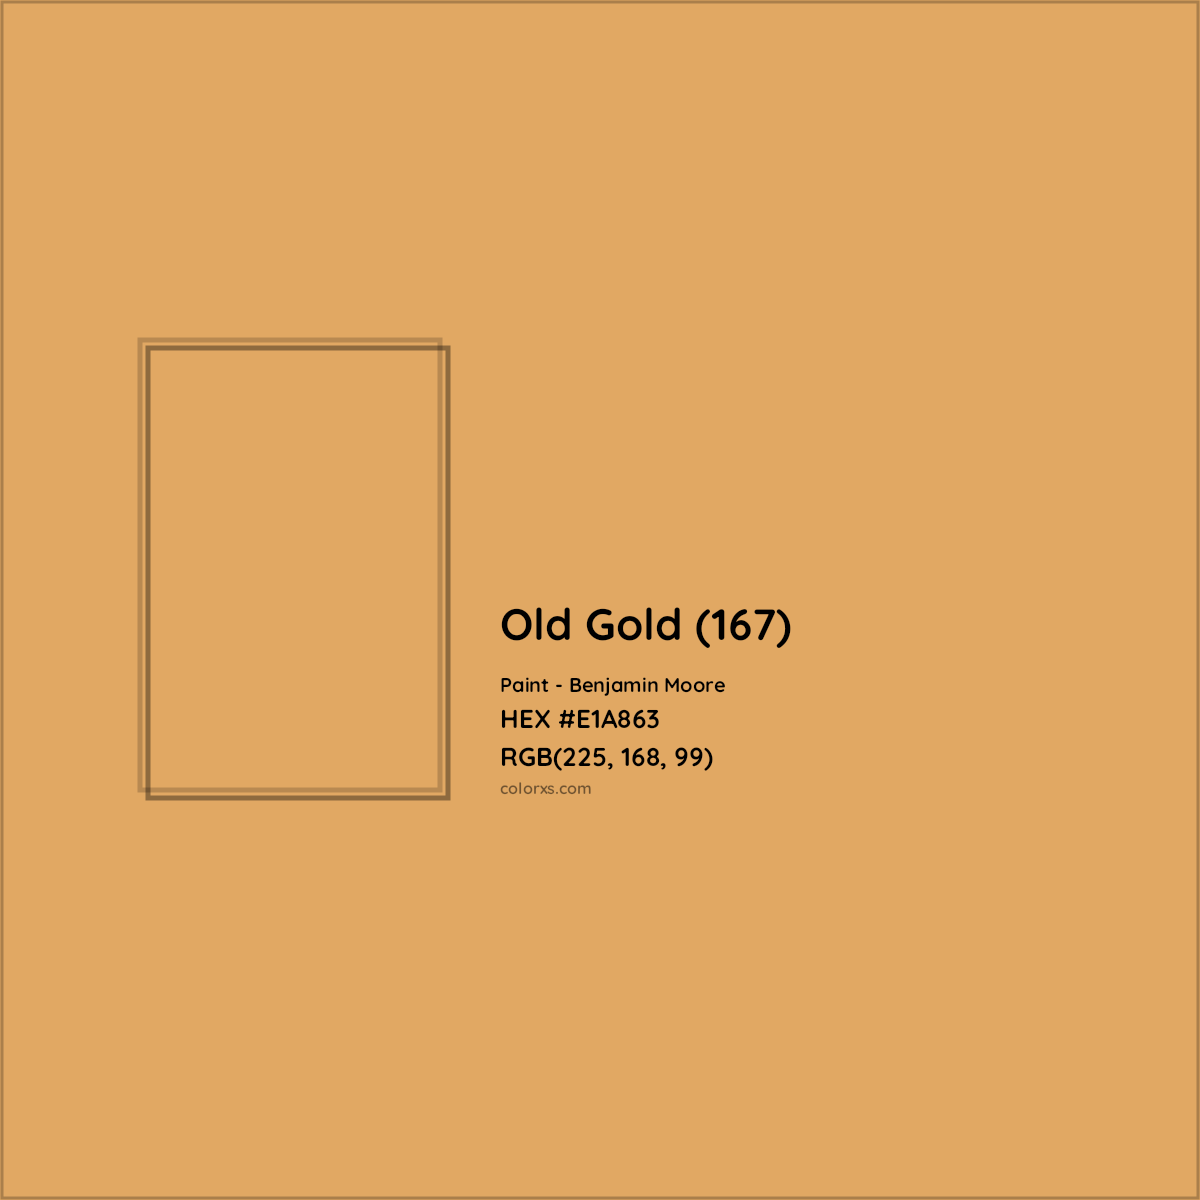 HEX #E1A863 Old Gold (167) Paint Benjamin Moore - Color Code